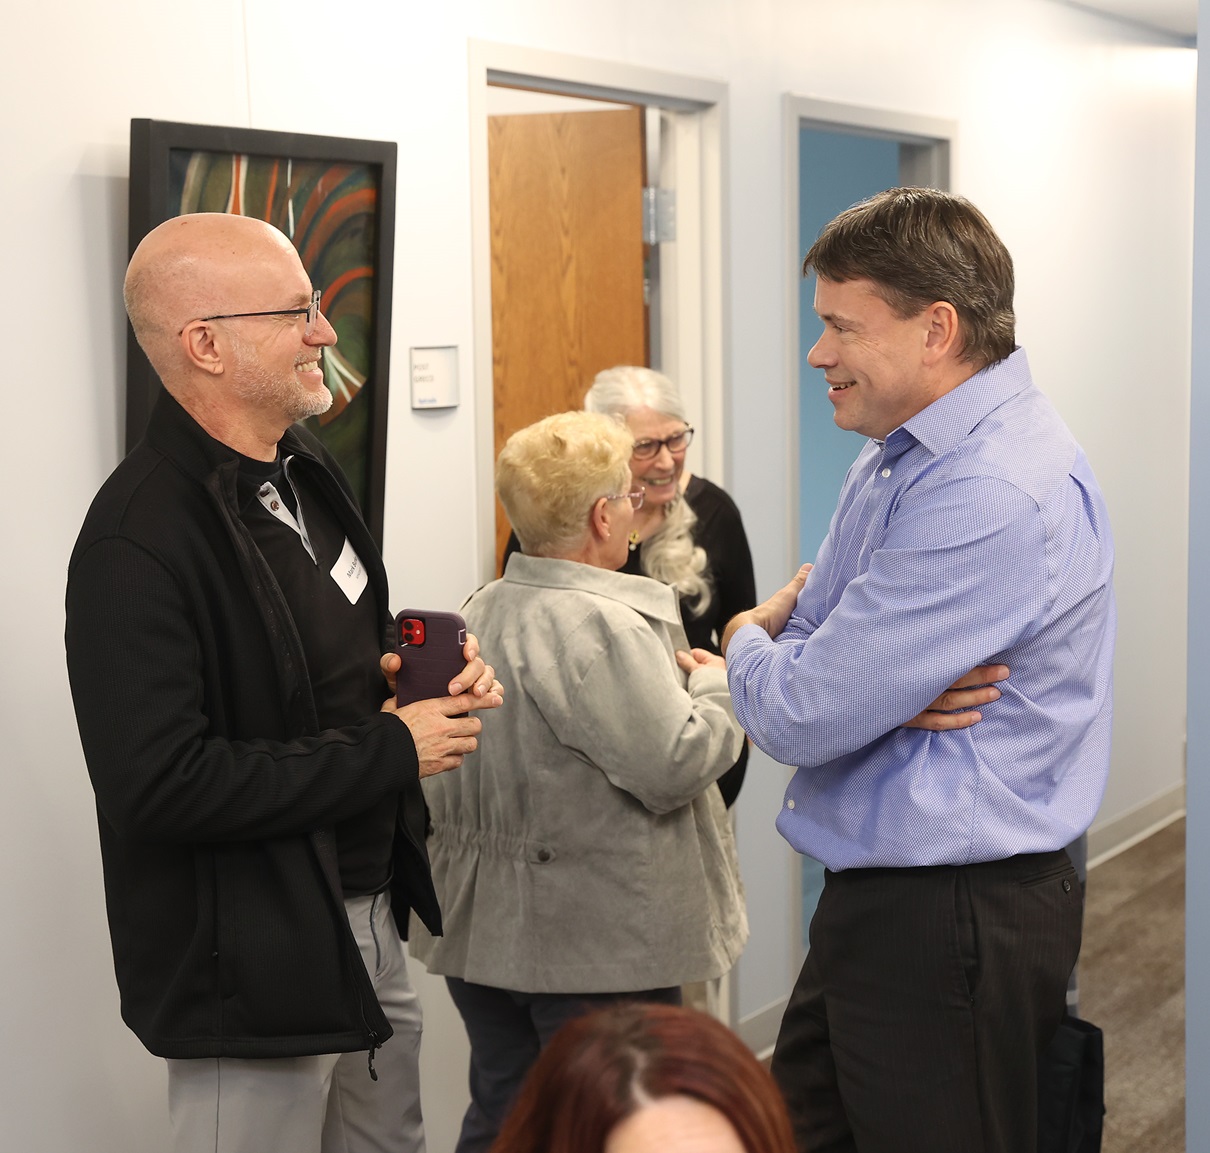 david steele mingling at intrada's open house